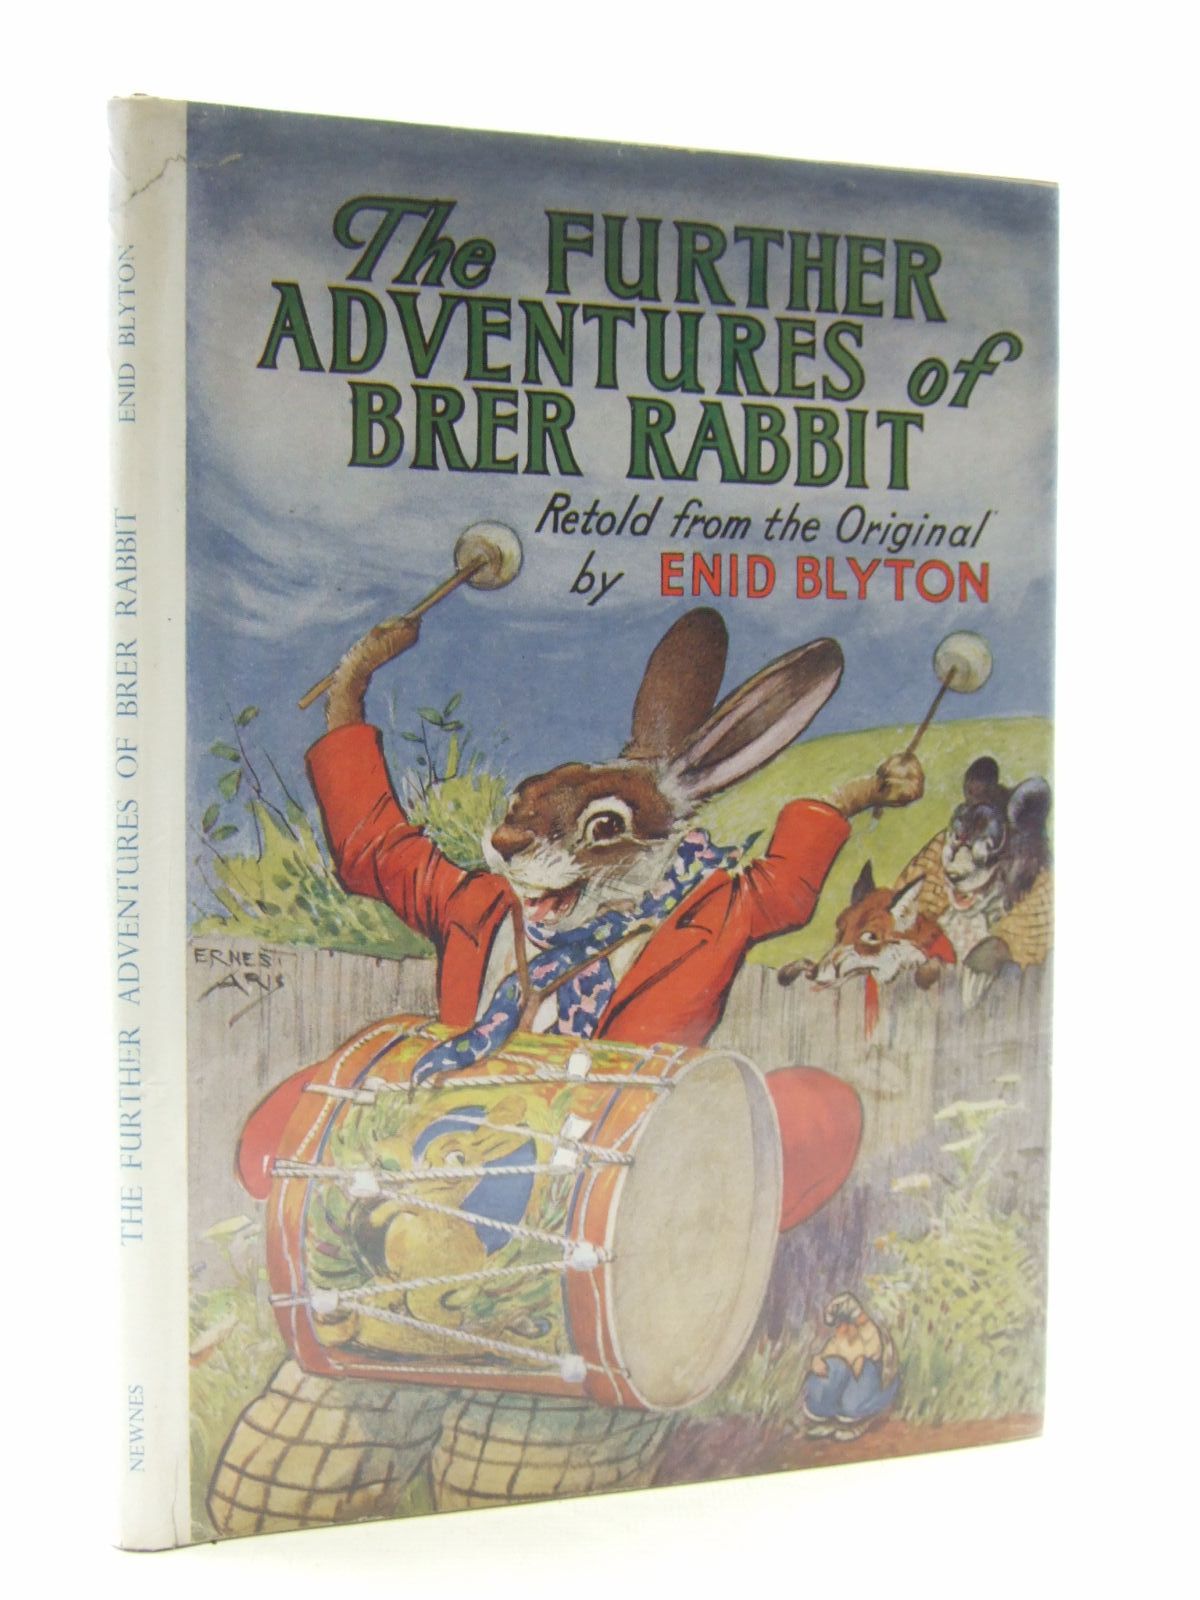 Cover of THE FURTHER ADVENTURES OF BRER RABBIT by Enid Blyton